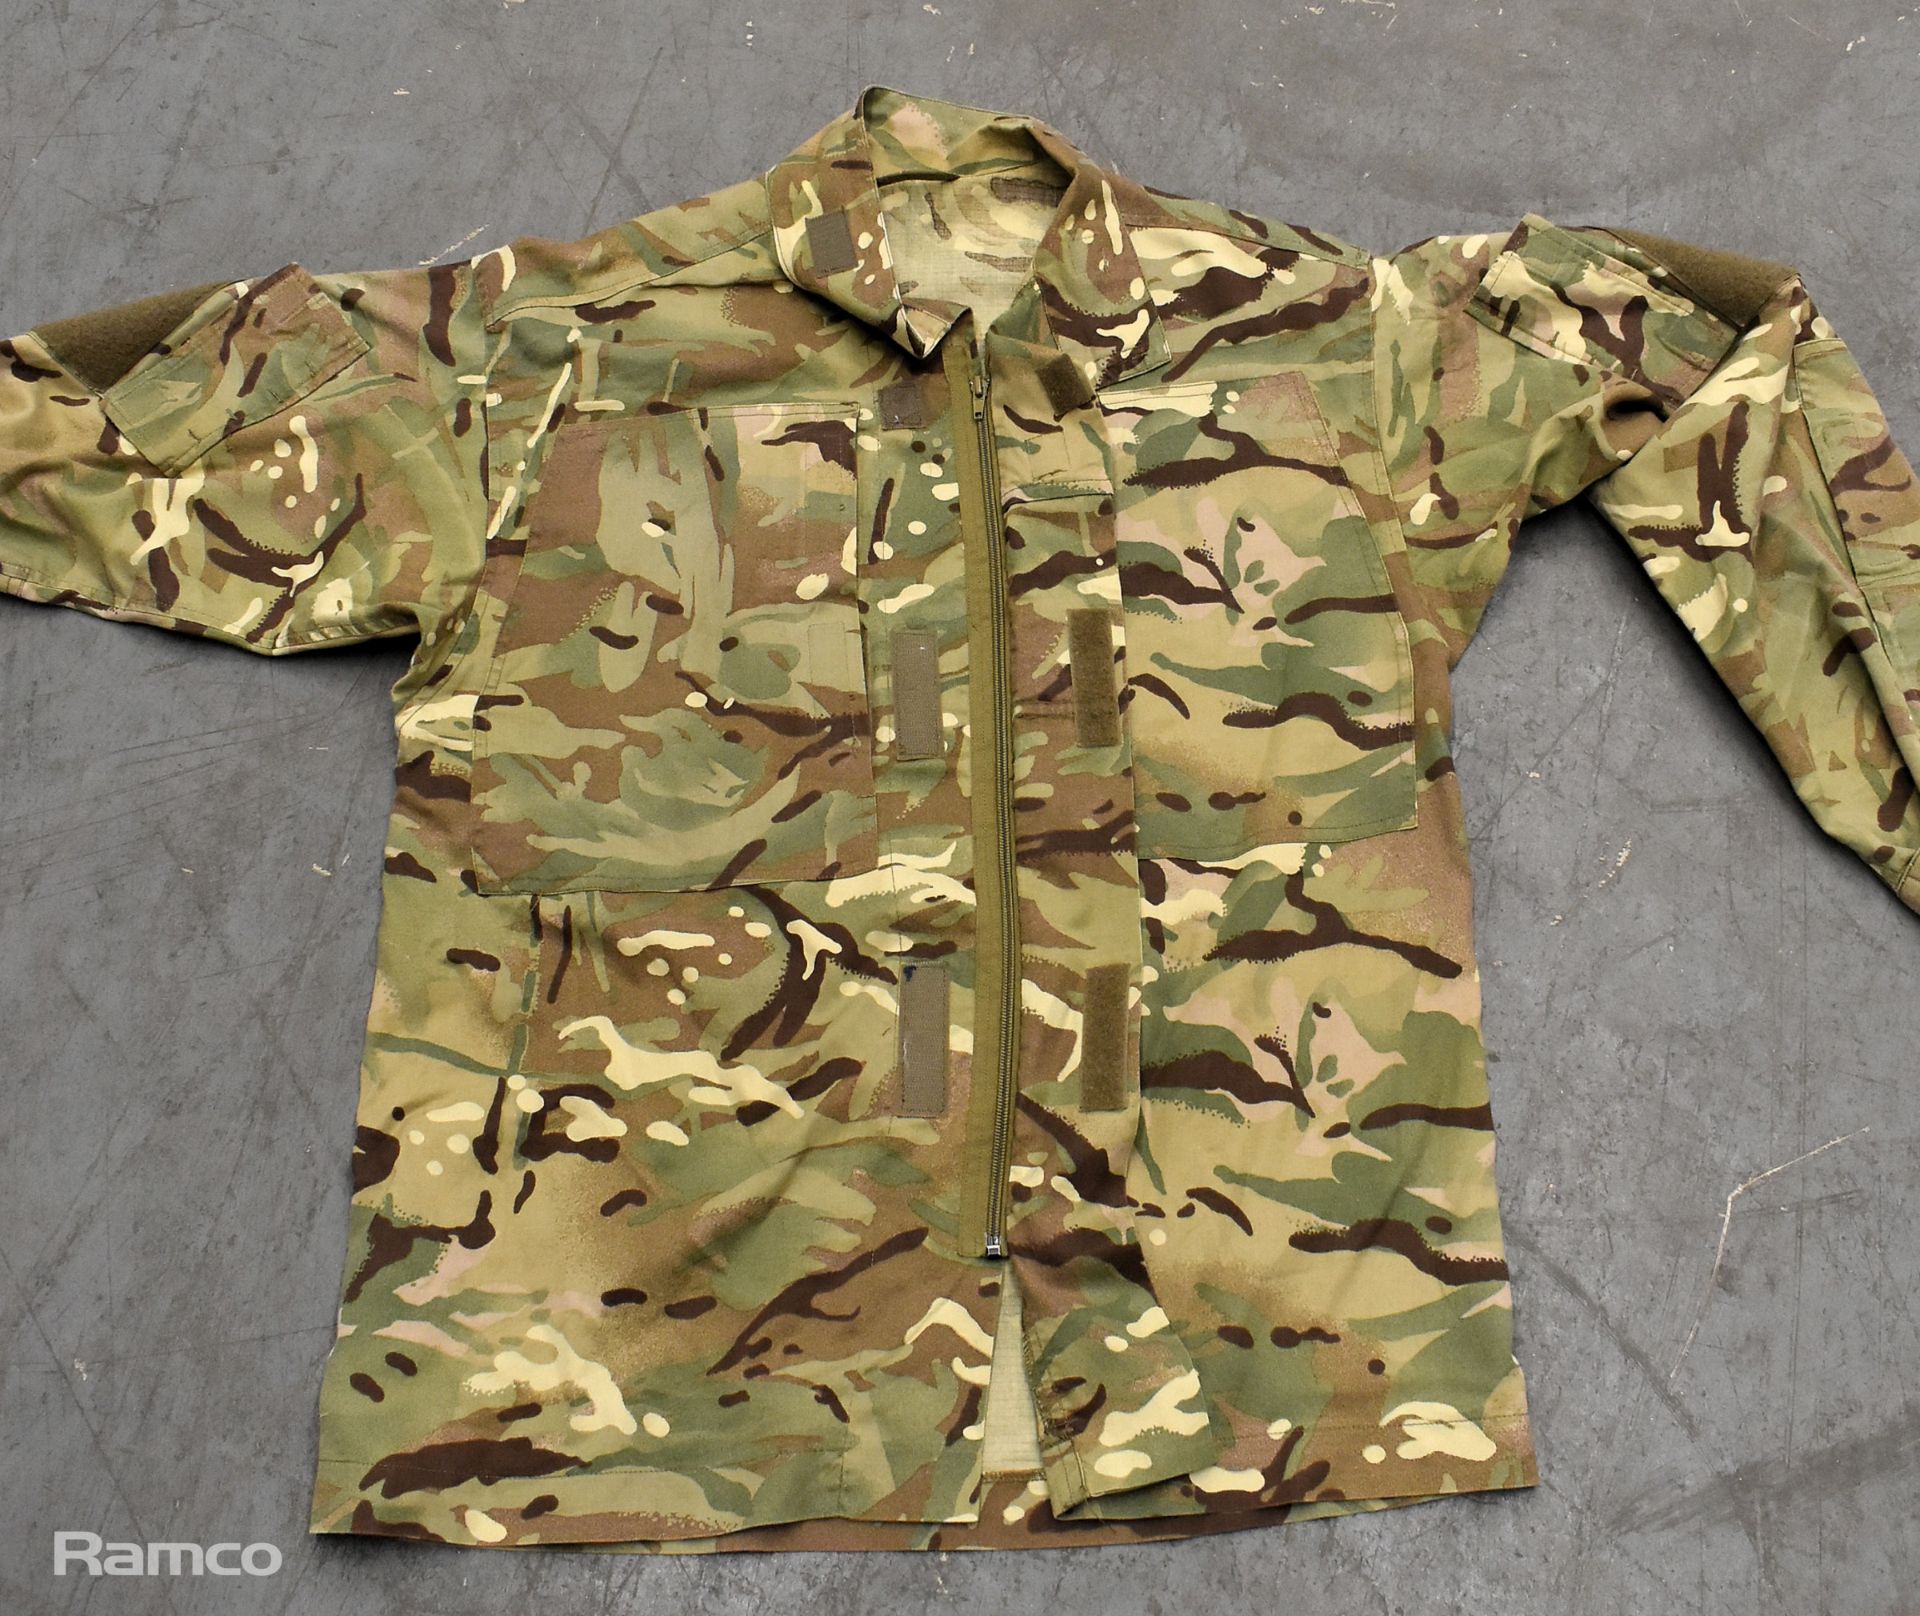 60x British Army MTP combat jackets warm weather - mixed grades and sizes - Image 4 of 7